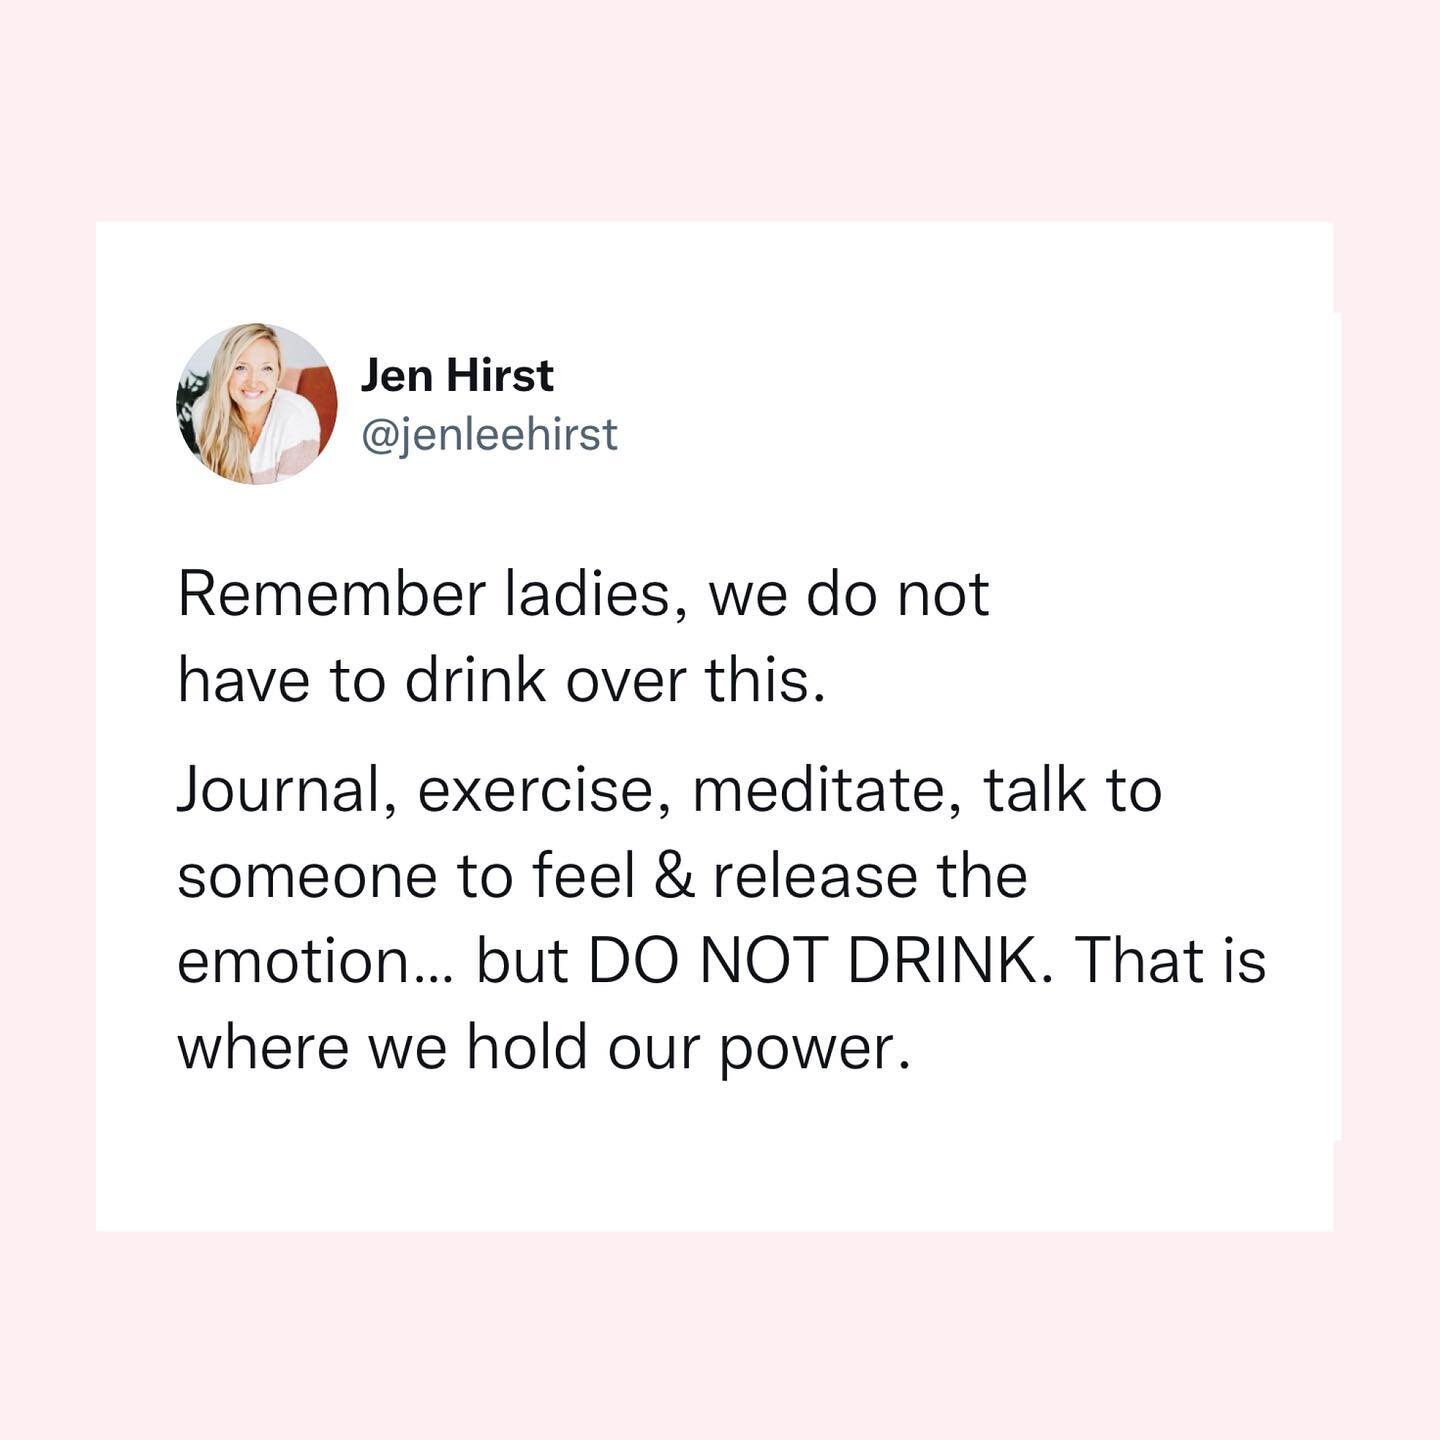 Stay present. Stay here. Sit with it. 

Instead of drinking it away, sit with it. Staying present is our superpower.

.
.
.
.
.
#rowvswade #glennondoyle #untamed #untamedbook	#sitwithit #supremecourt #womensrights #sobermama #sobermommy #womeninrecov